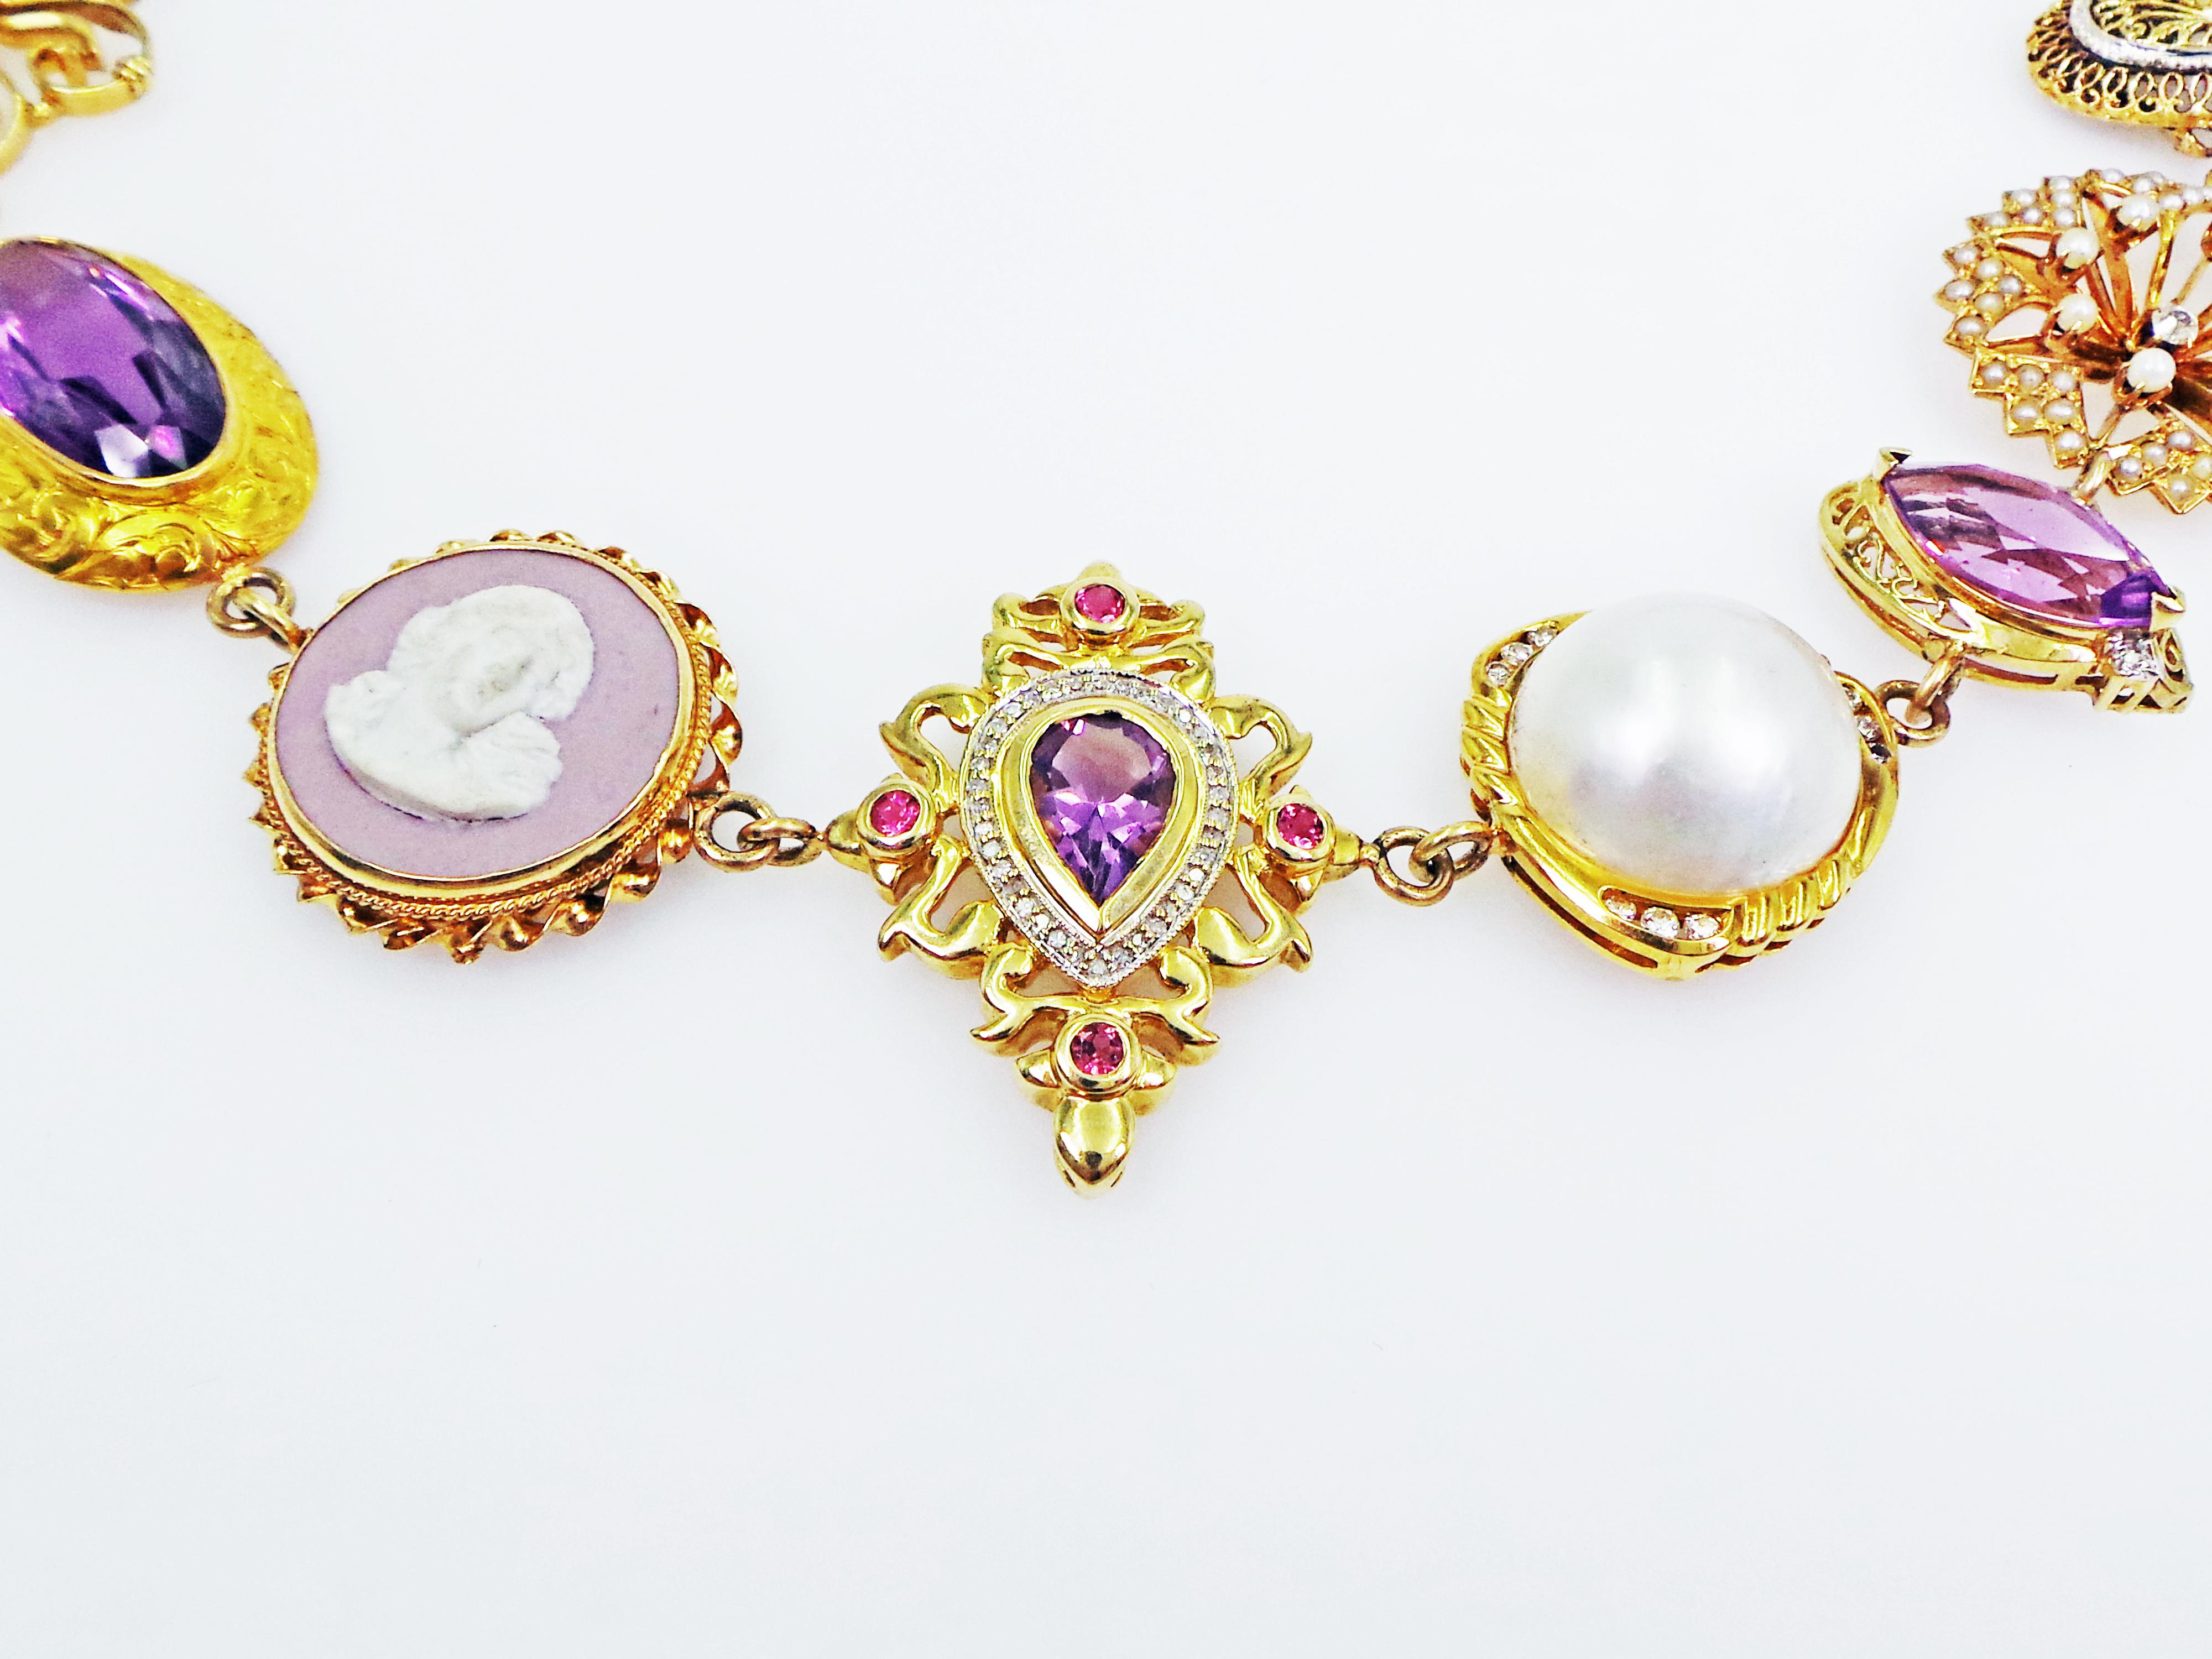 One-of-a-kind, Bohemian necklace features a variety of rich, regal purple color tone gemstones and vintage jewelry components set in 14k yellow gold. Necklace is comprised of 17 beautiful pieces including: Australian Boulder Opal, White Diamond,